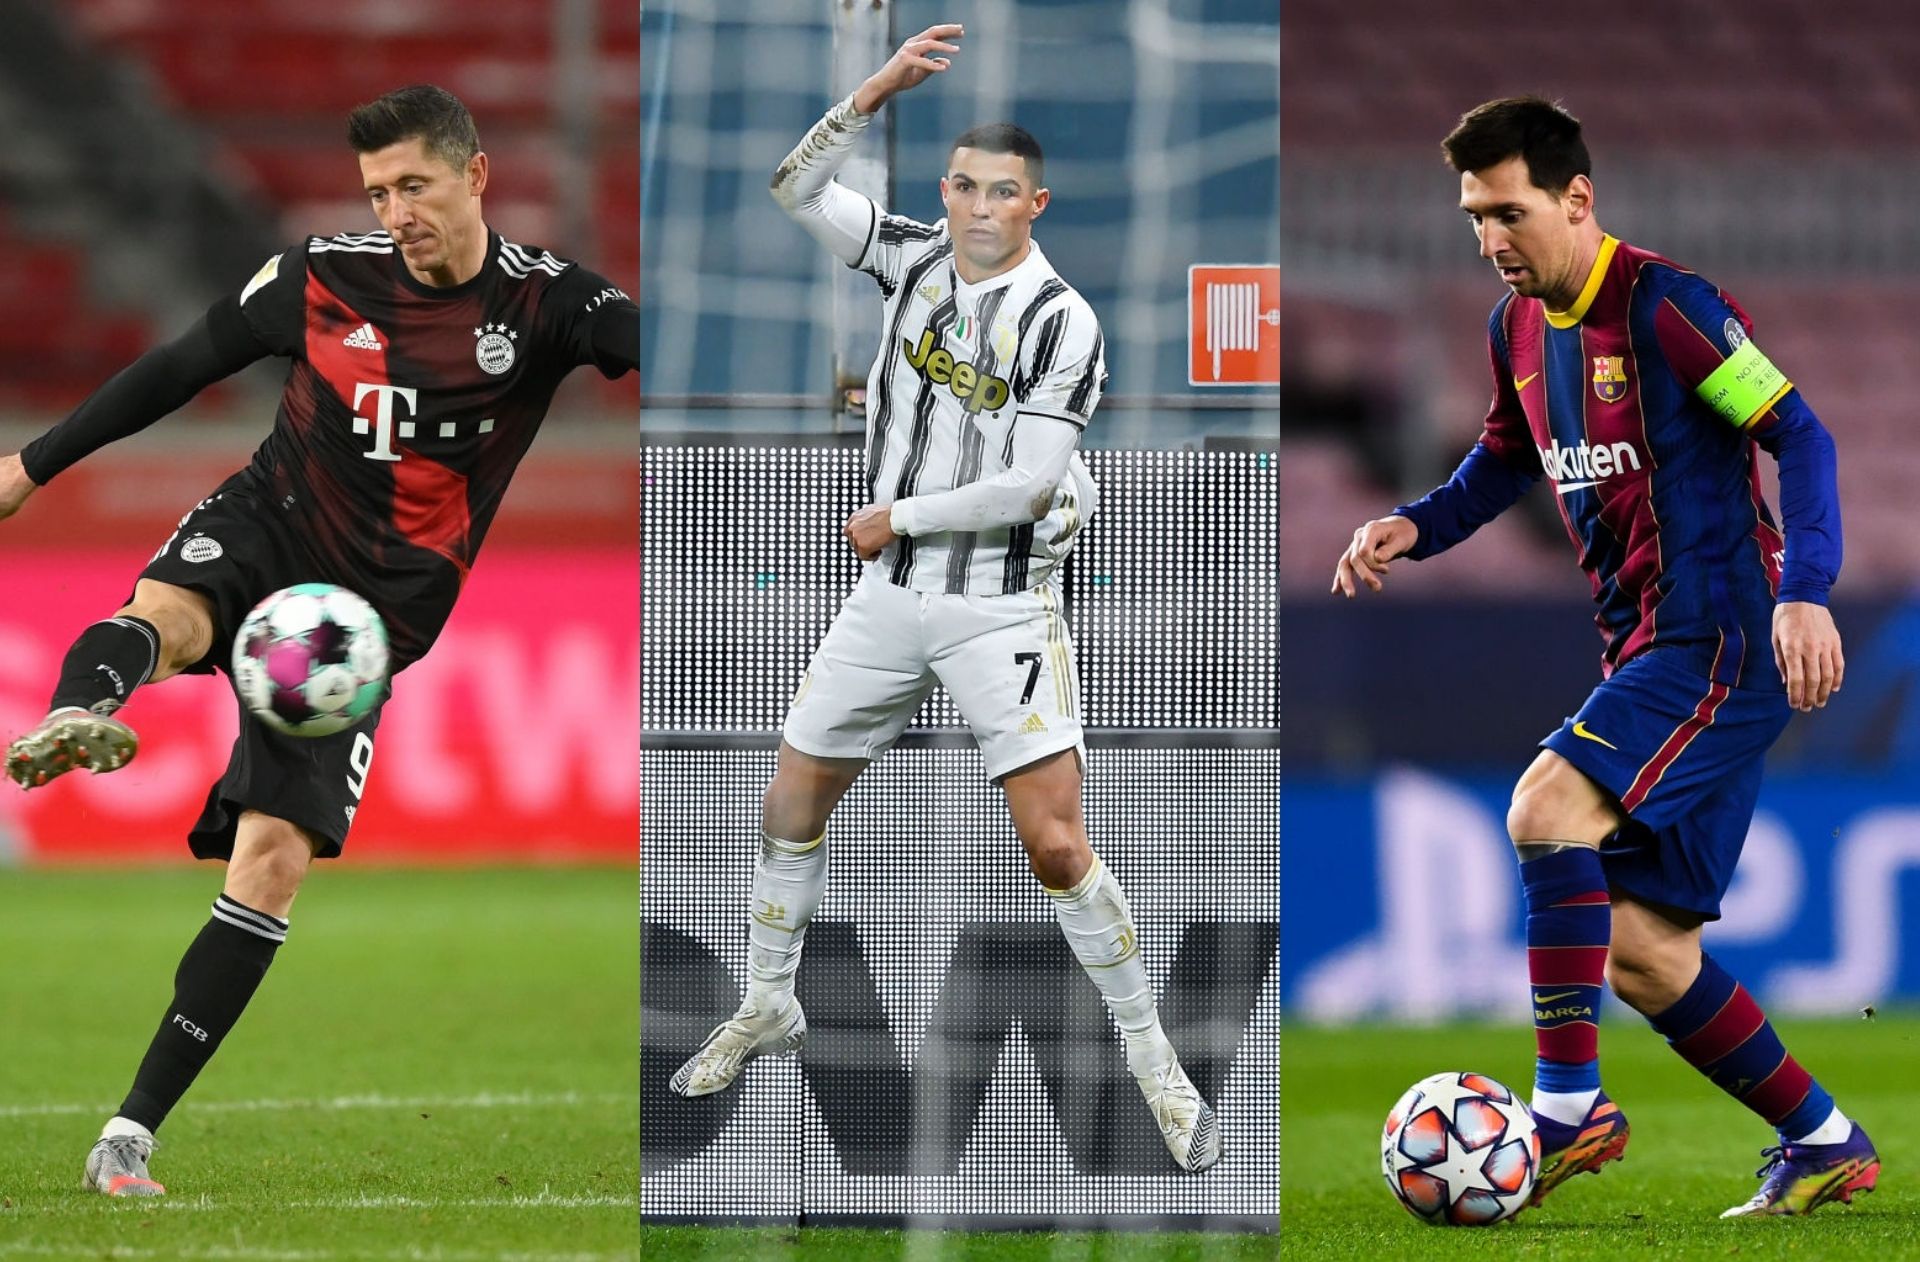 The Top 5 footballers of 2020 around the world of football